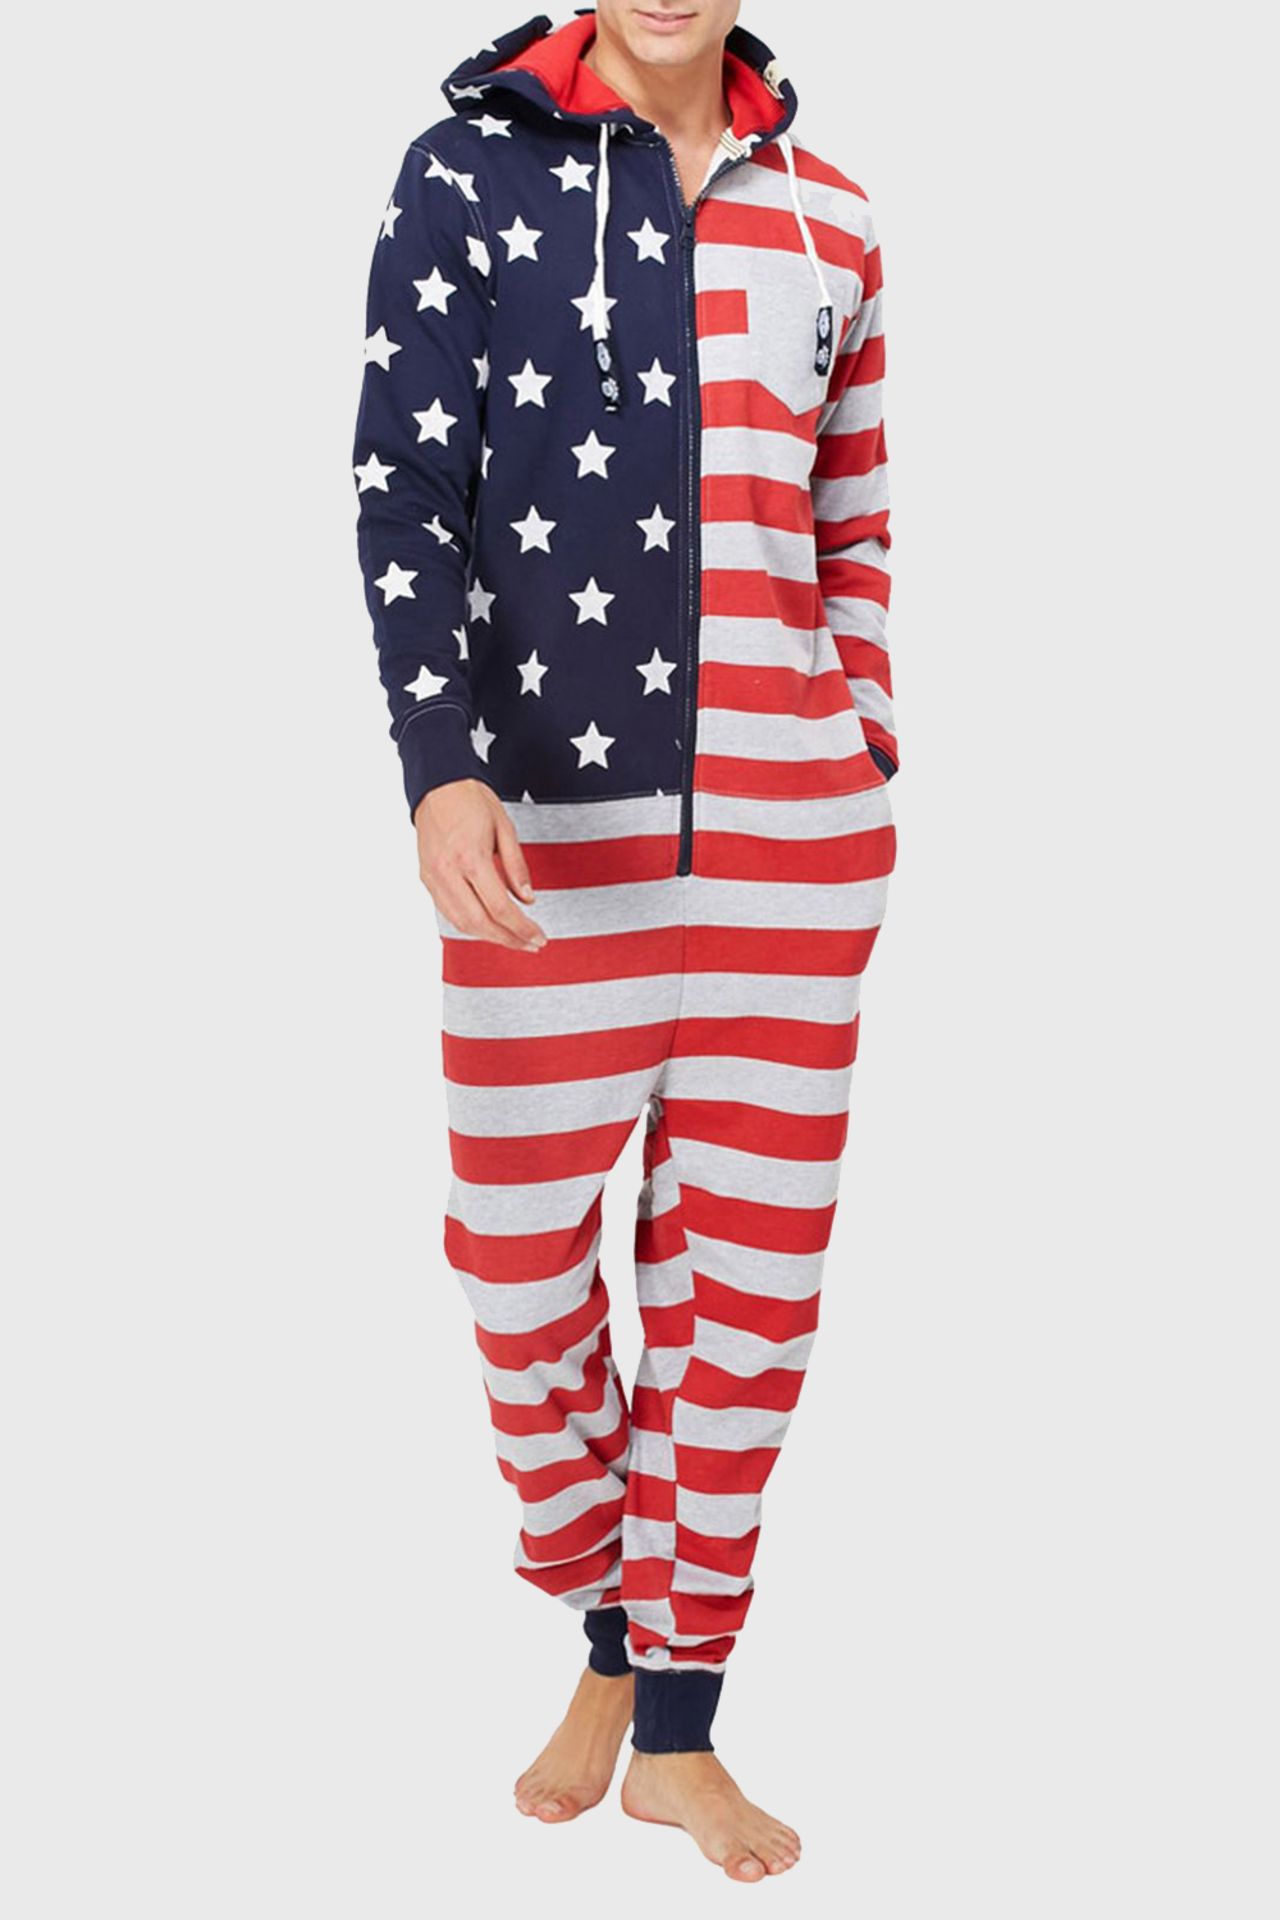 12 X TOKYO LAUNDRY AMERICAN FLAG ALL IN ONE ONESIE SIZES S-M-L-XL